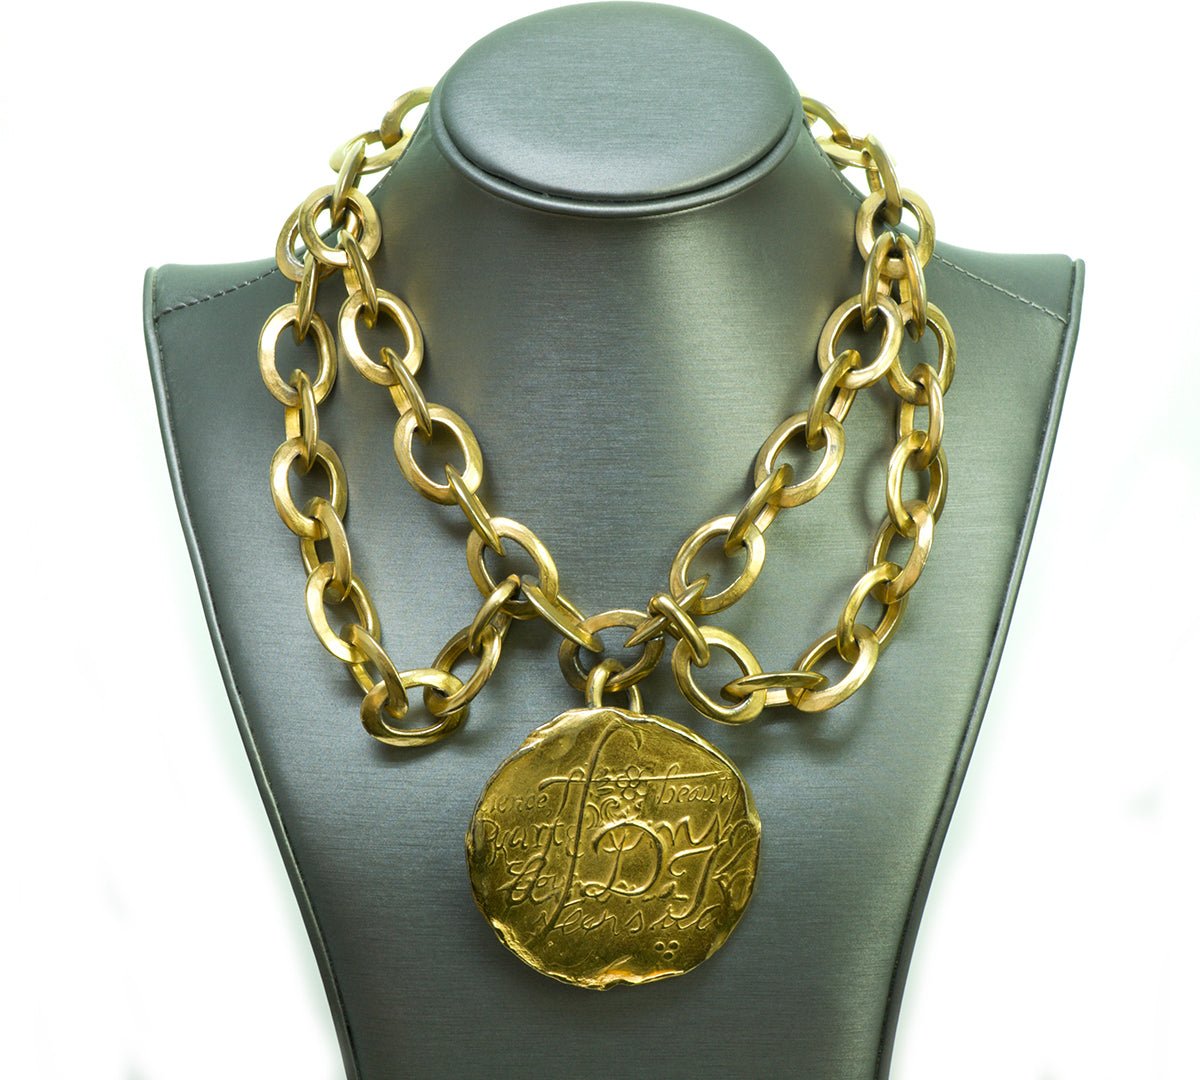 Donna Karan Chain Medallion Necklace - DSF Antique Jewelry